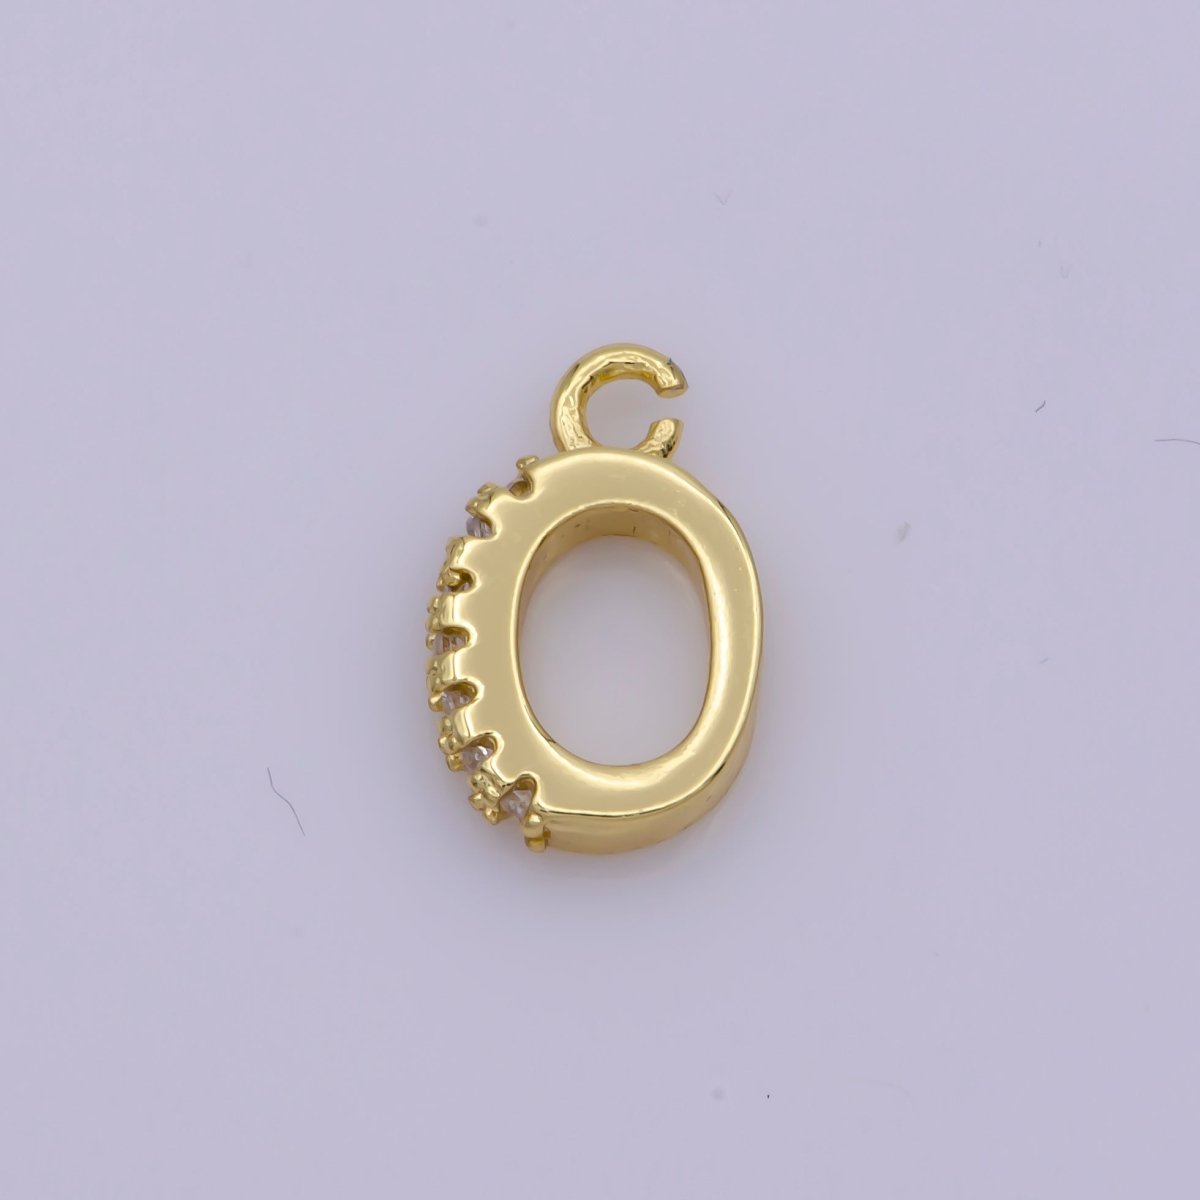 Charm Pendant bail with CZ Stone Detail, Necklace Connector Findings, Gold Filled over Brass L-530 - DLUXCA